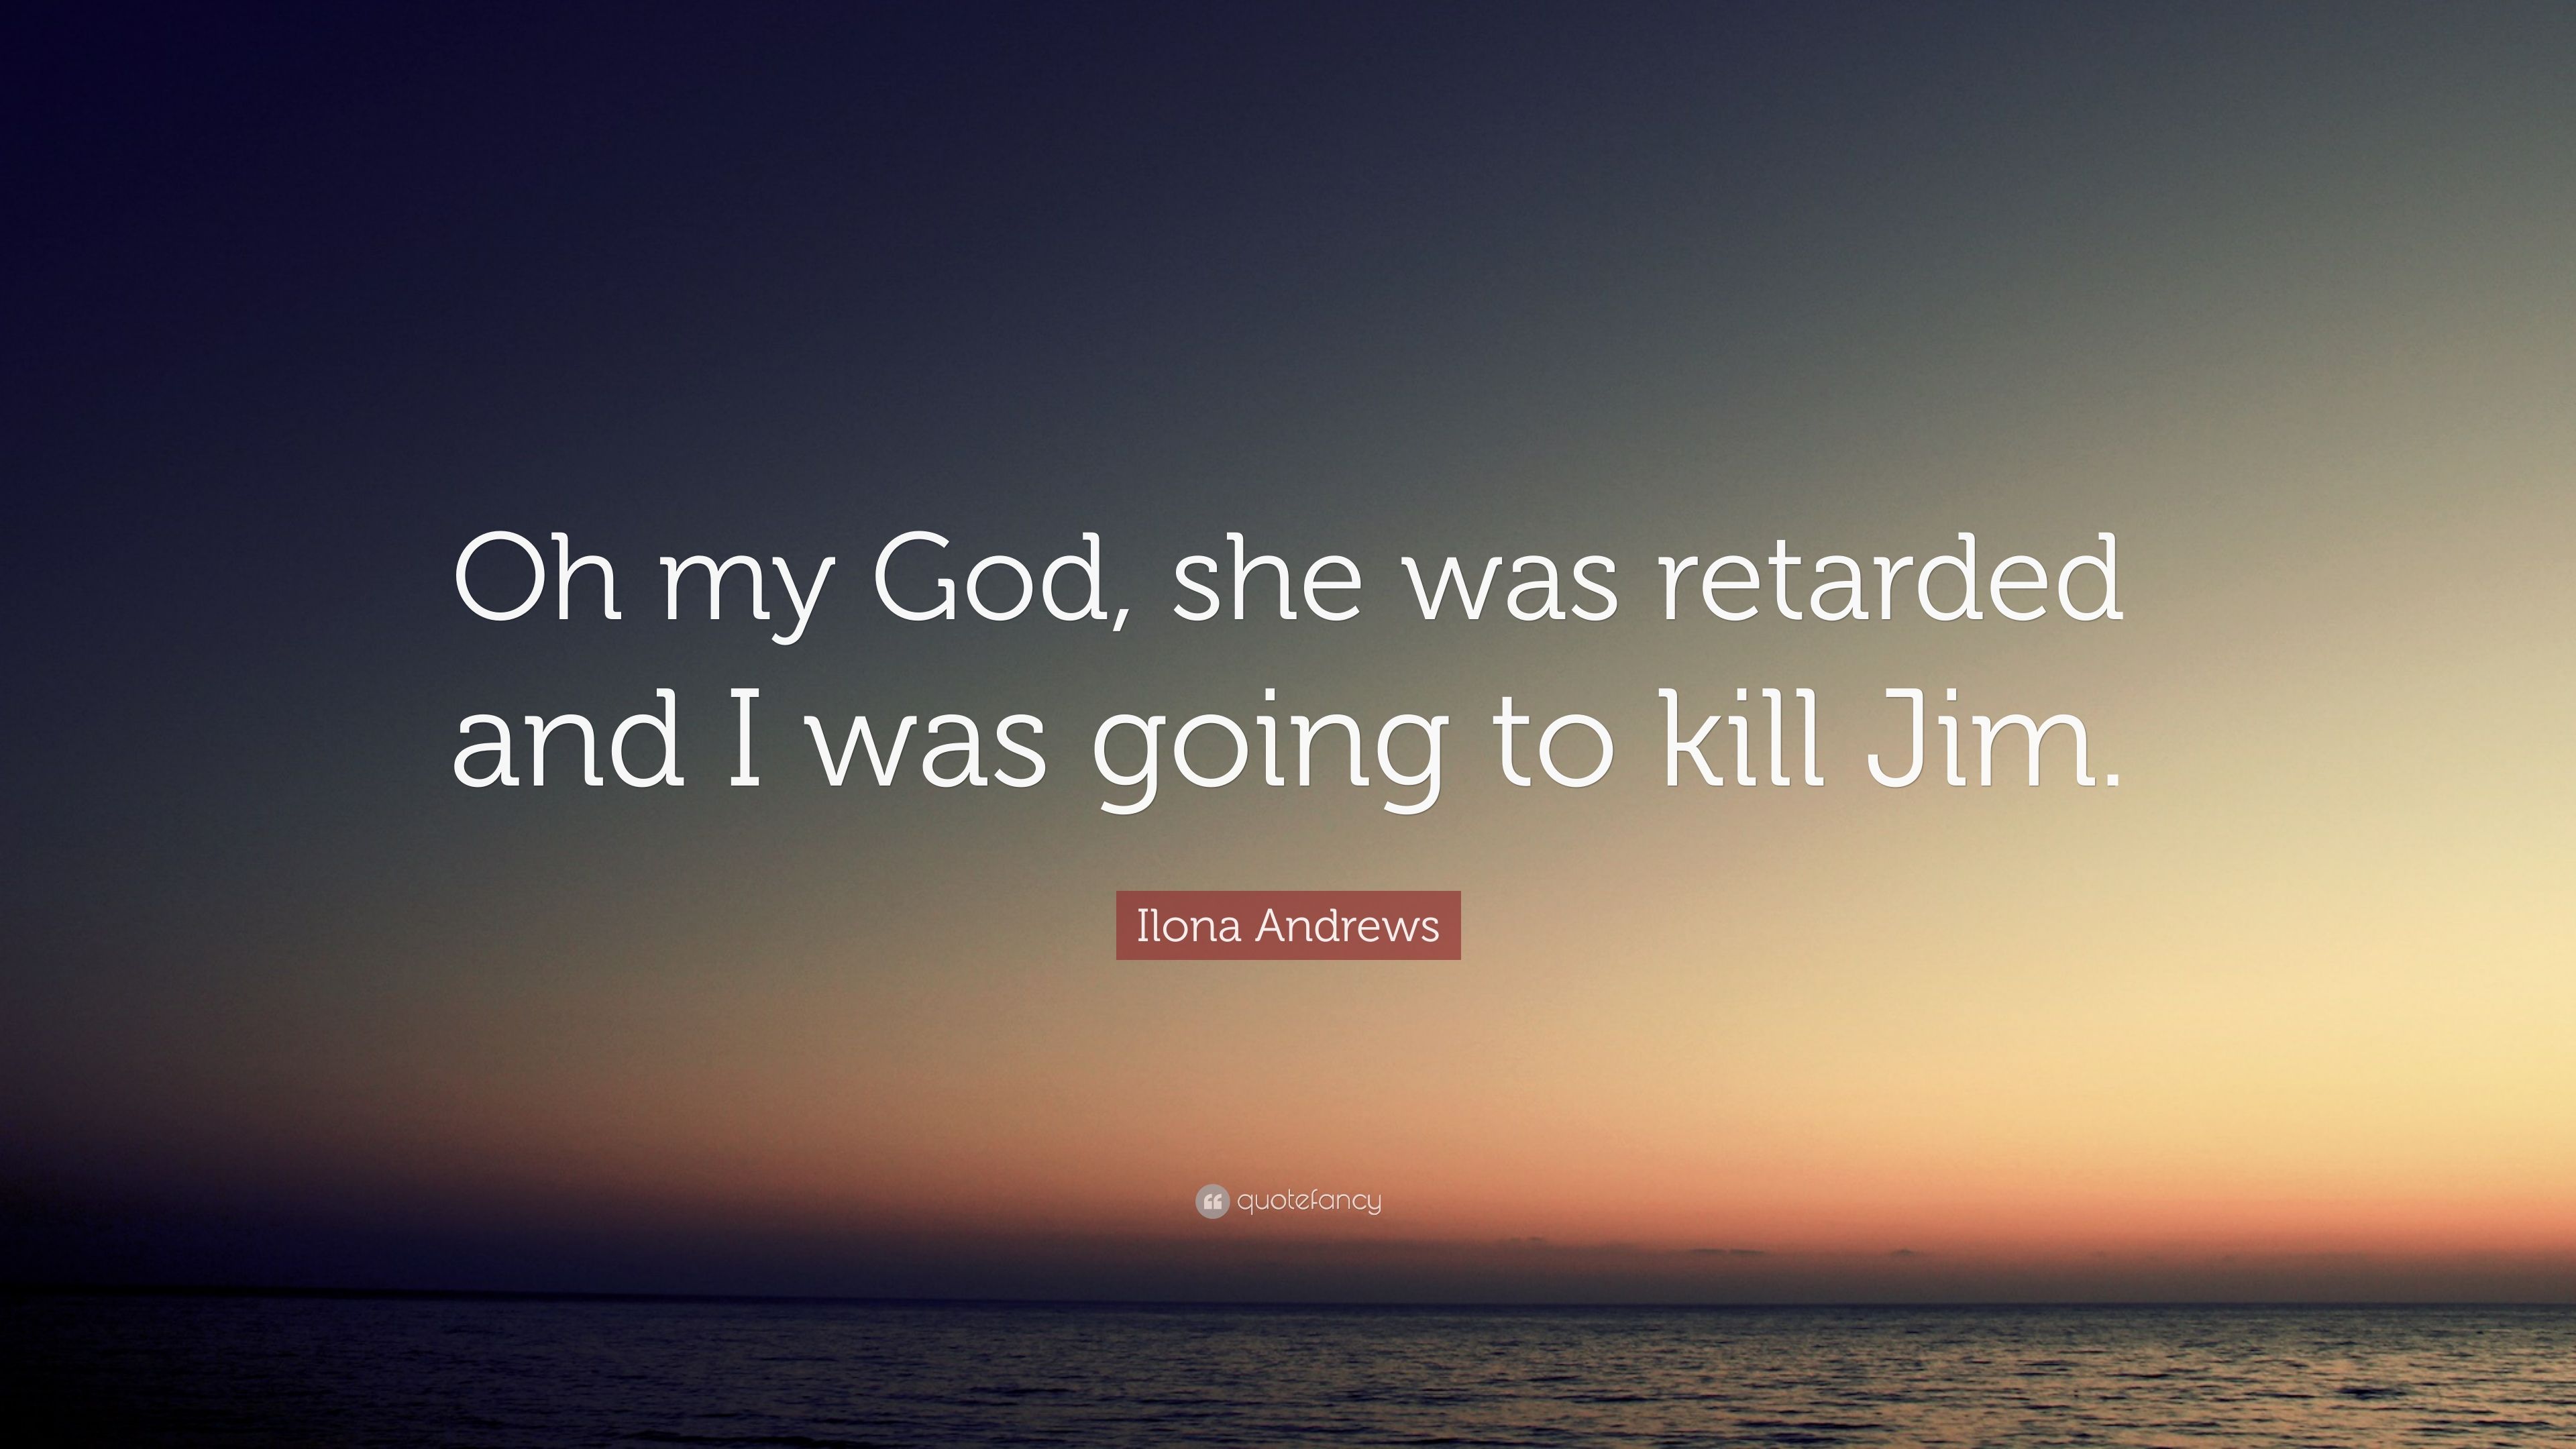 Ilona Andrews Quote: “Oh my God, she was retarded and I was going